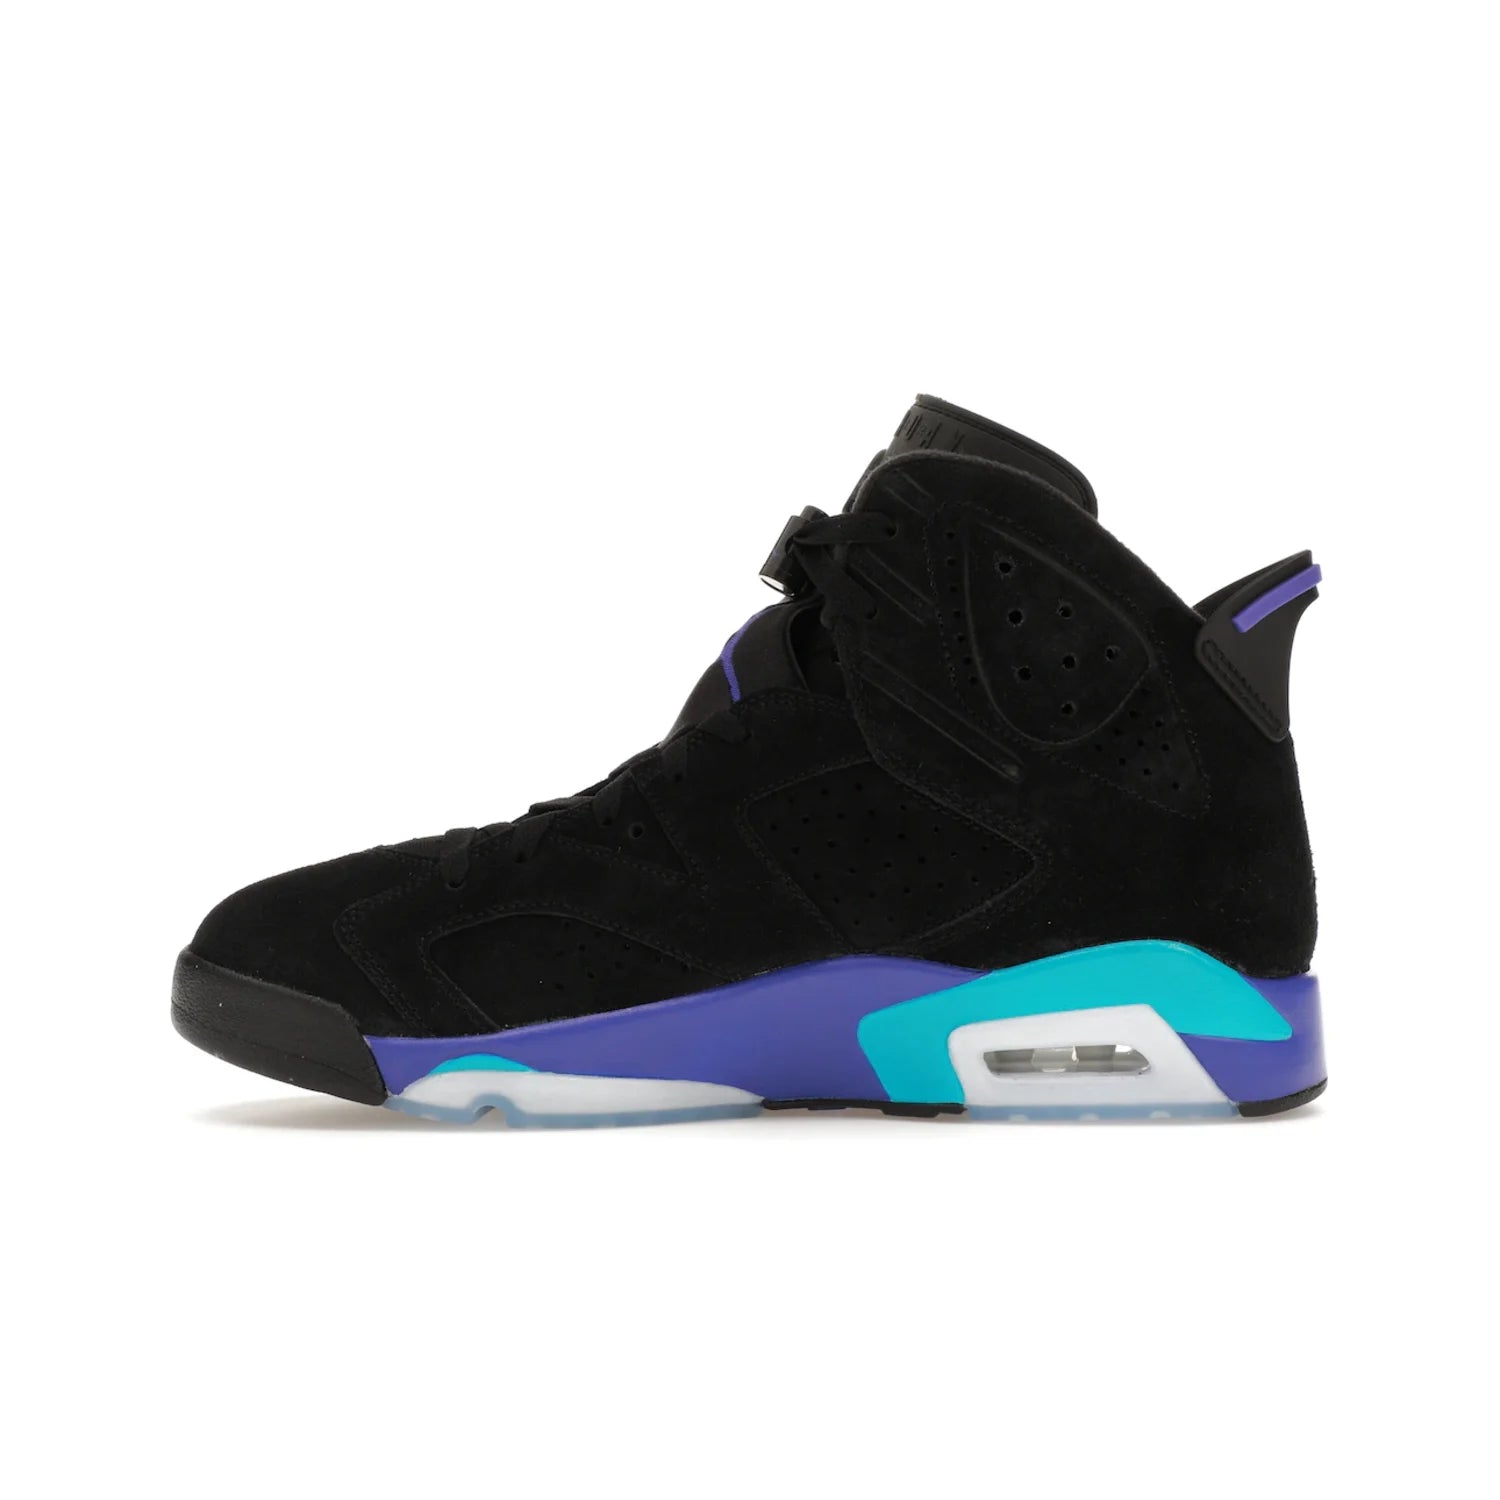 Jordan 6 Retro Aqua - Image 19 - Only at www.BallersClubKickz.com - Feel the classic Jordan 6 Retro Aqua paired with modern style. Black, Bright Concord, and Aquatone hues are crafted with a supple suede and rubberized heel tab. This standout sneaker adds signature Jordan elements at $200. Elevate your style with the Jordan 6 Retro Aqua.